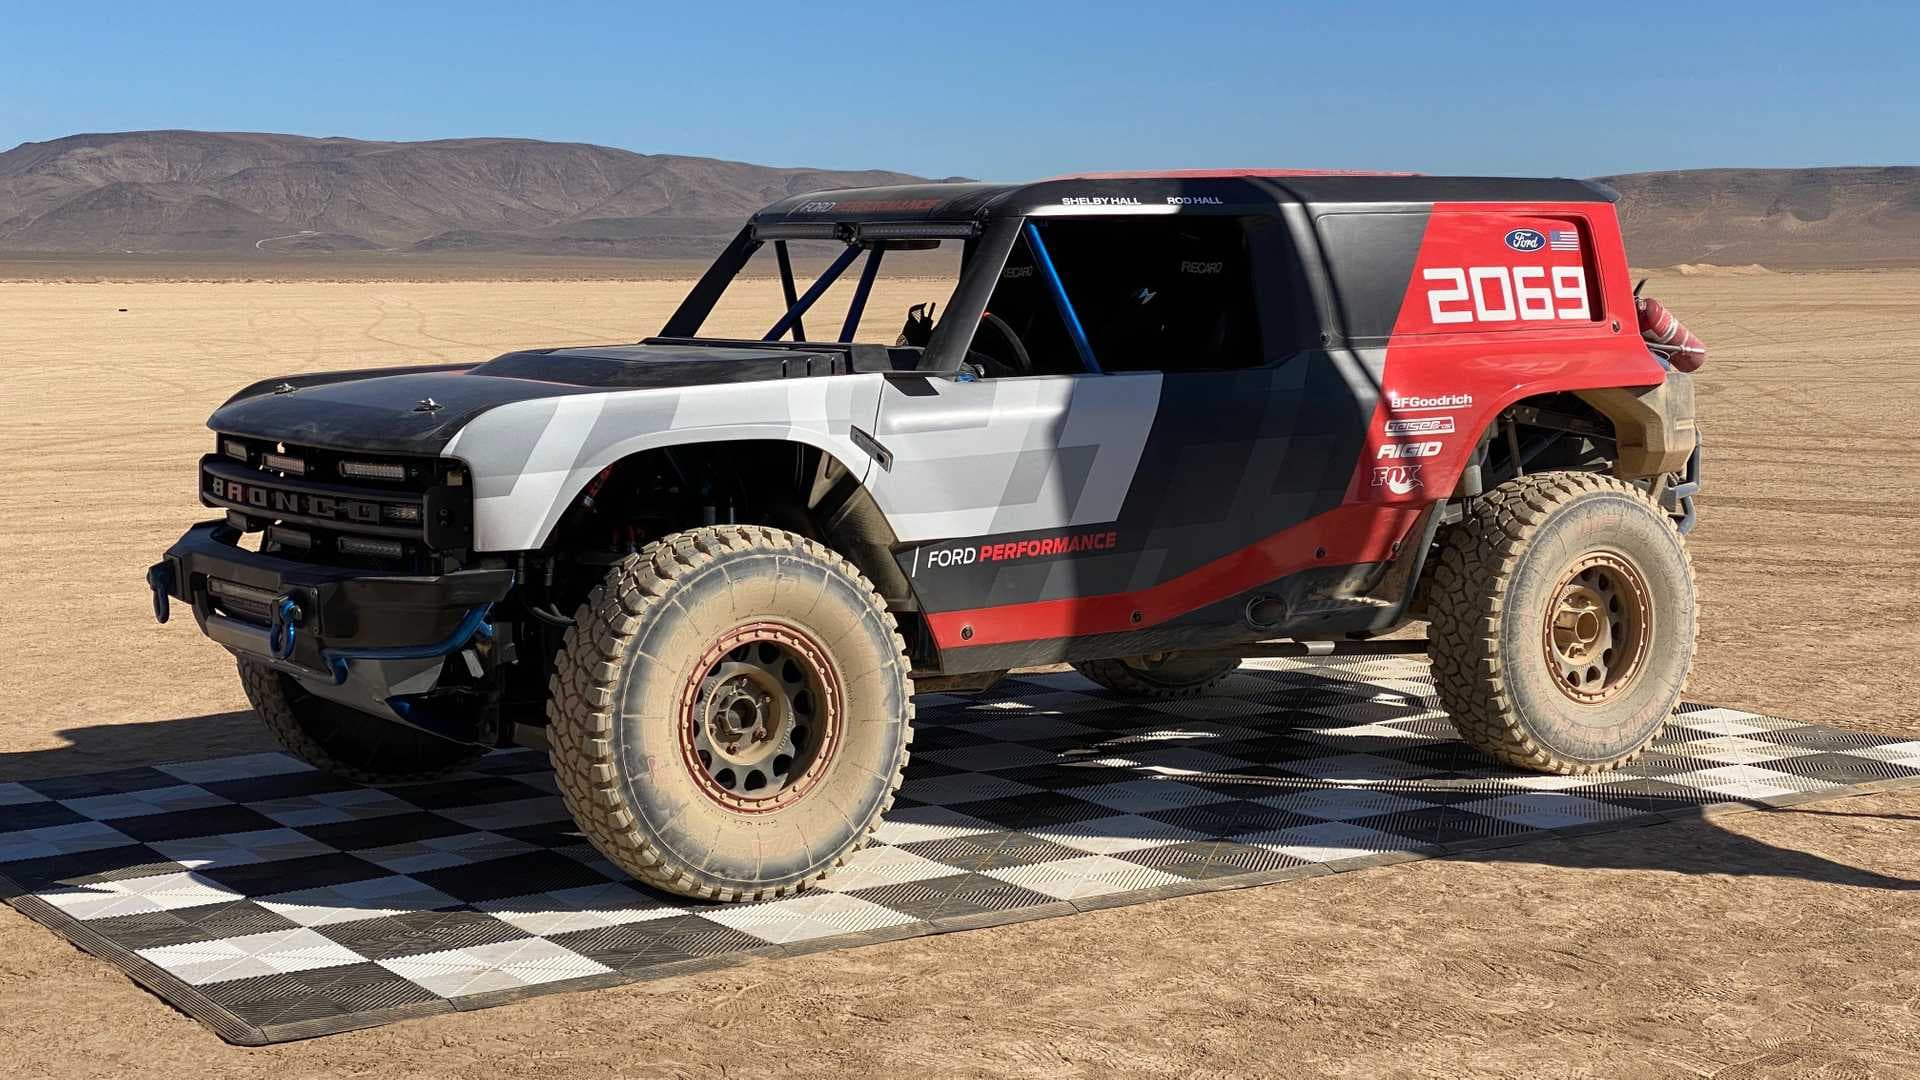 Build the Ford Bronco R Baja Suspension With $8K in Off-the-Shelf Parts